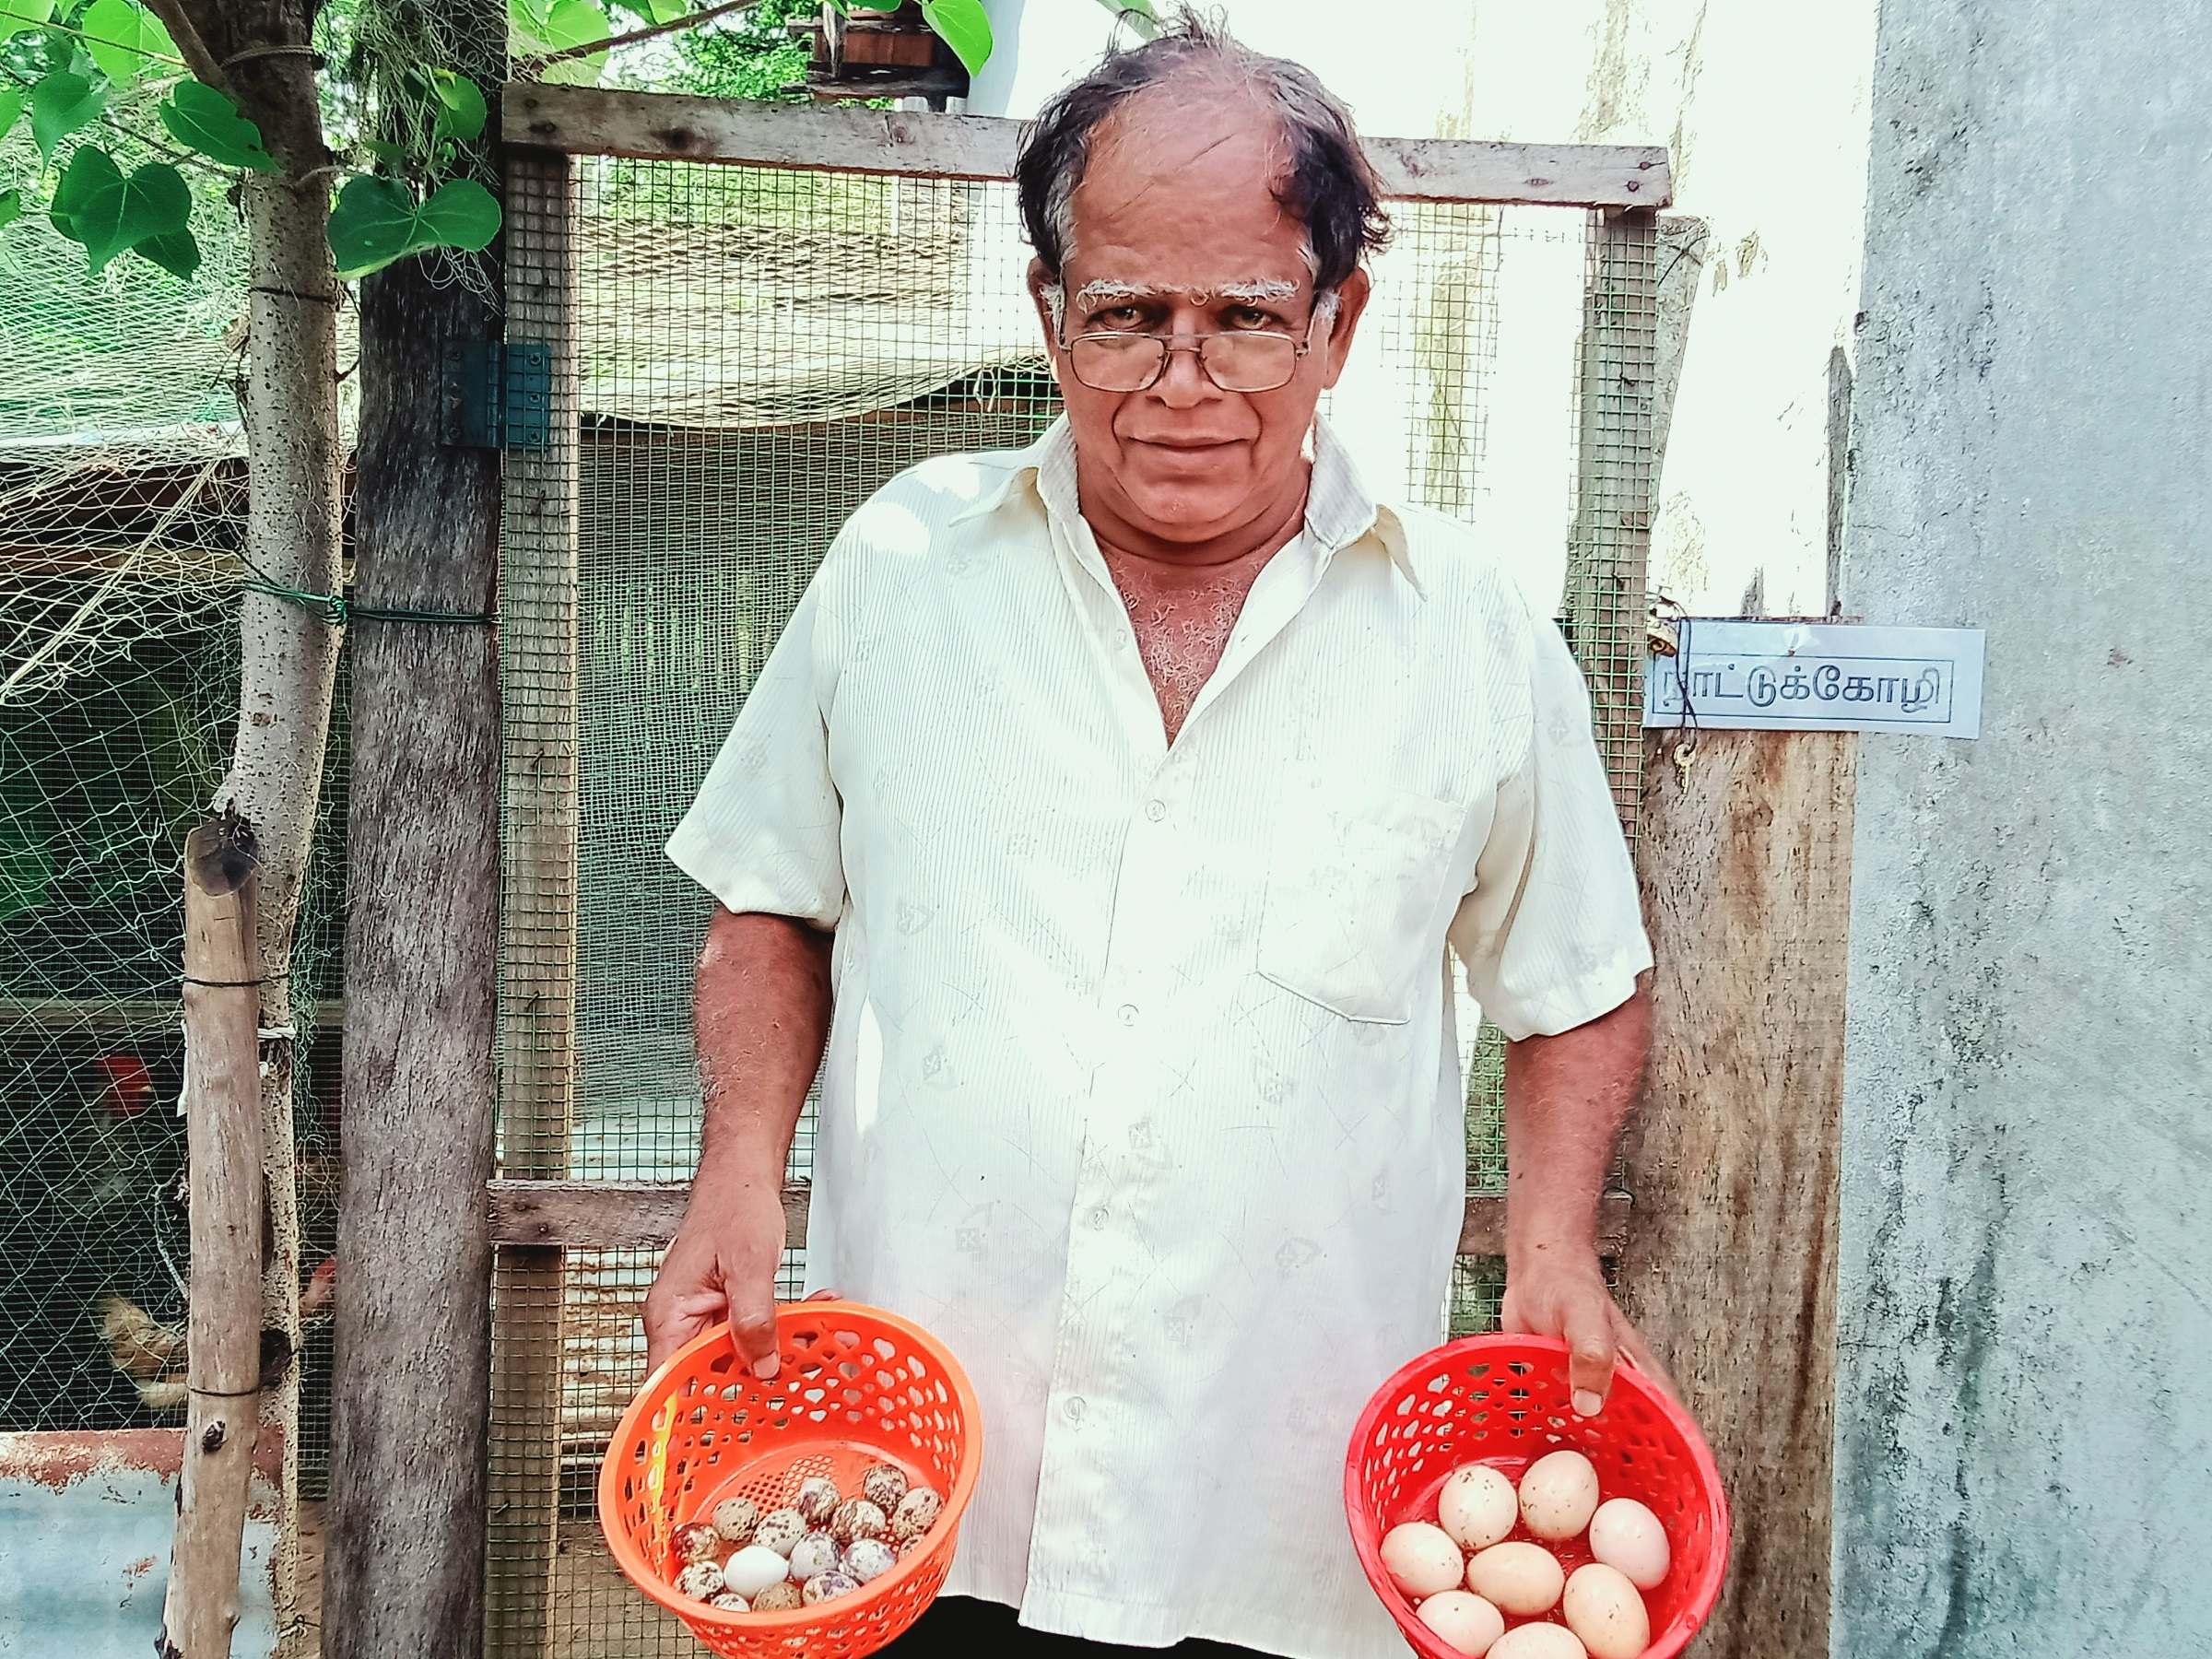 An elderly man in Sri Lanka shows different eggs in two plastic bowls.